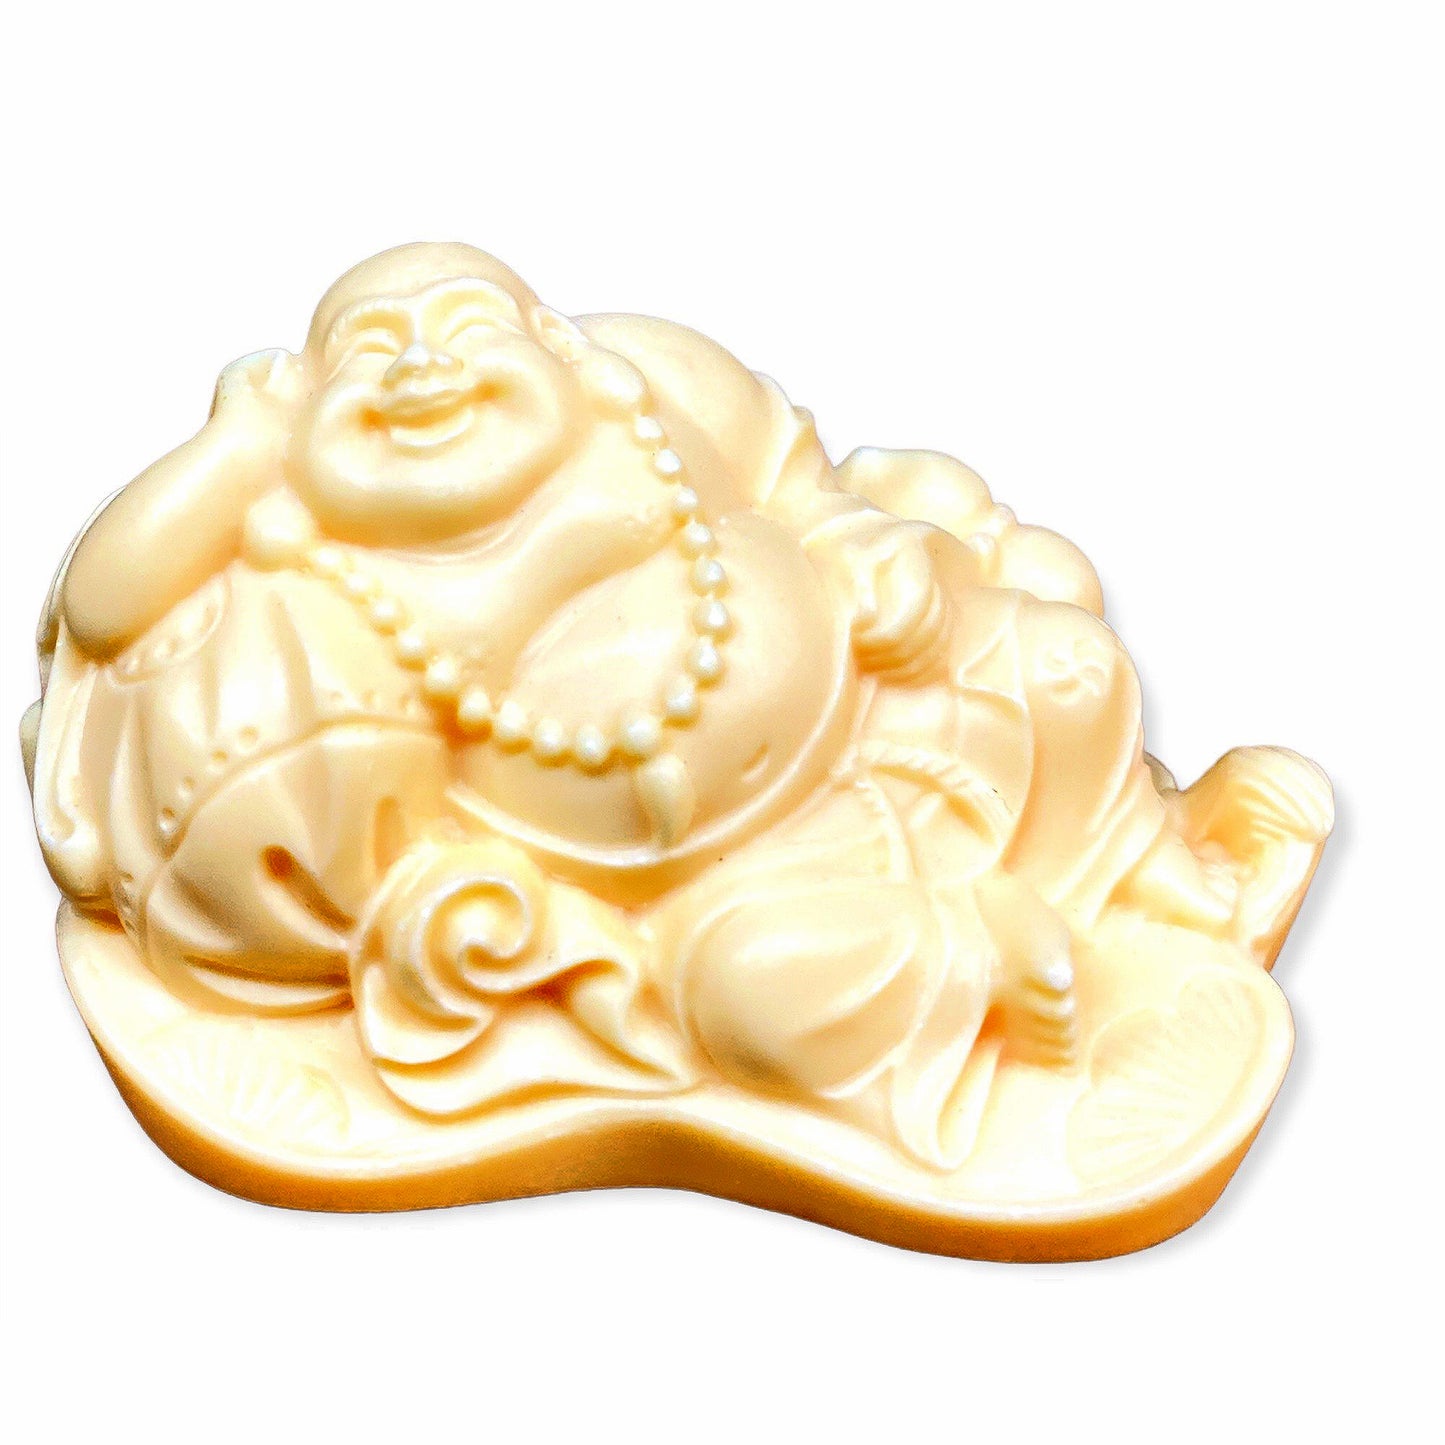 Laying Fat Buddha Carved of Ivory Nut - 2.5 inch - 6.5cm - China - NEW1022